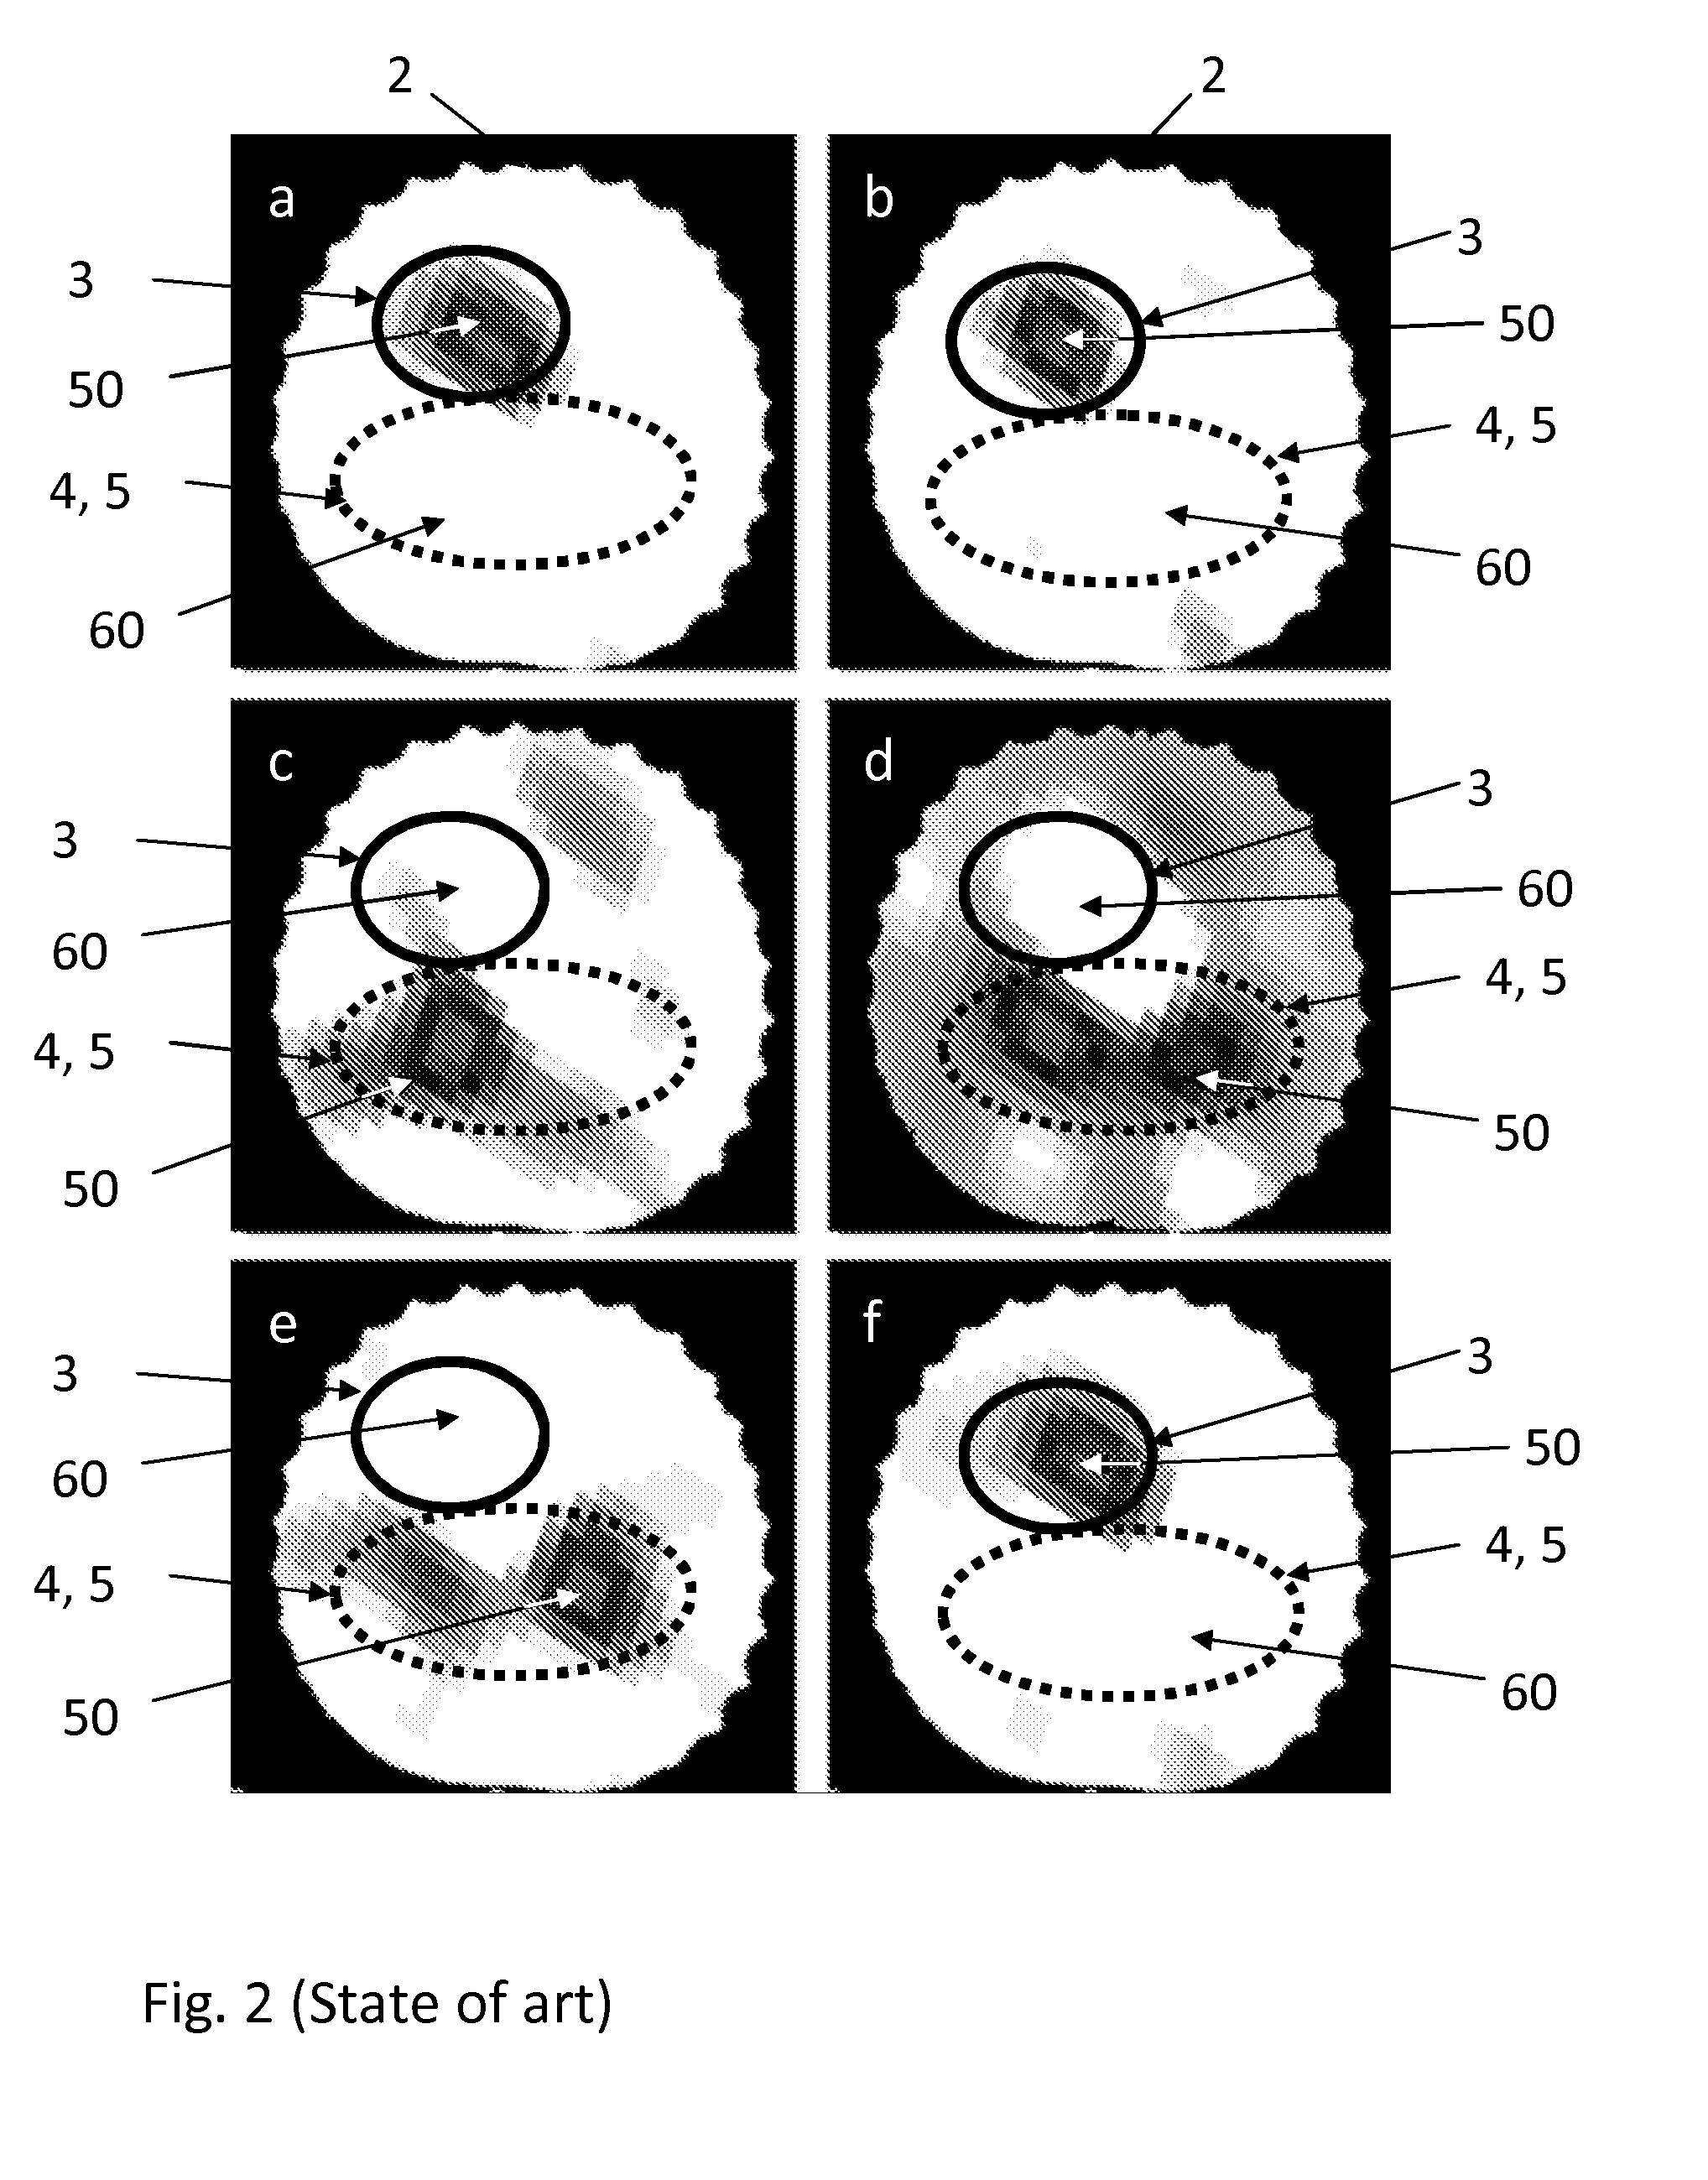 Method and Apparatus for the Non-Invasive Measurement of Pulse Transit Times (PTT)